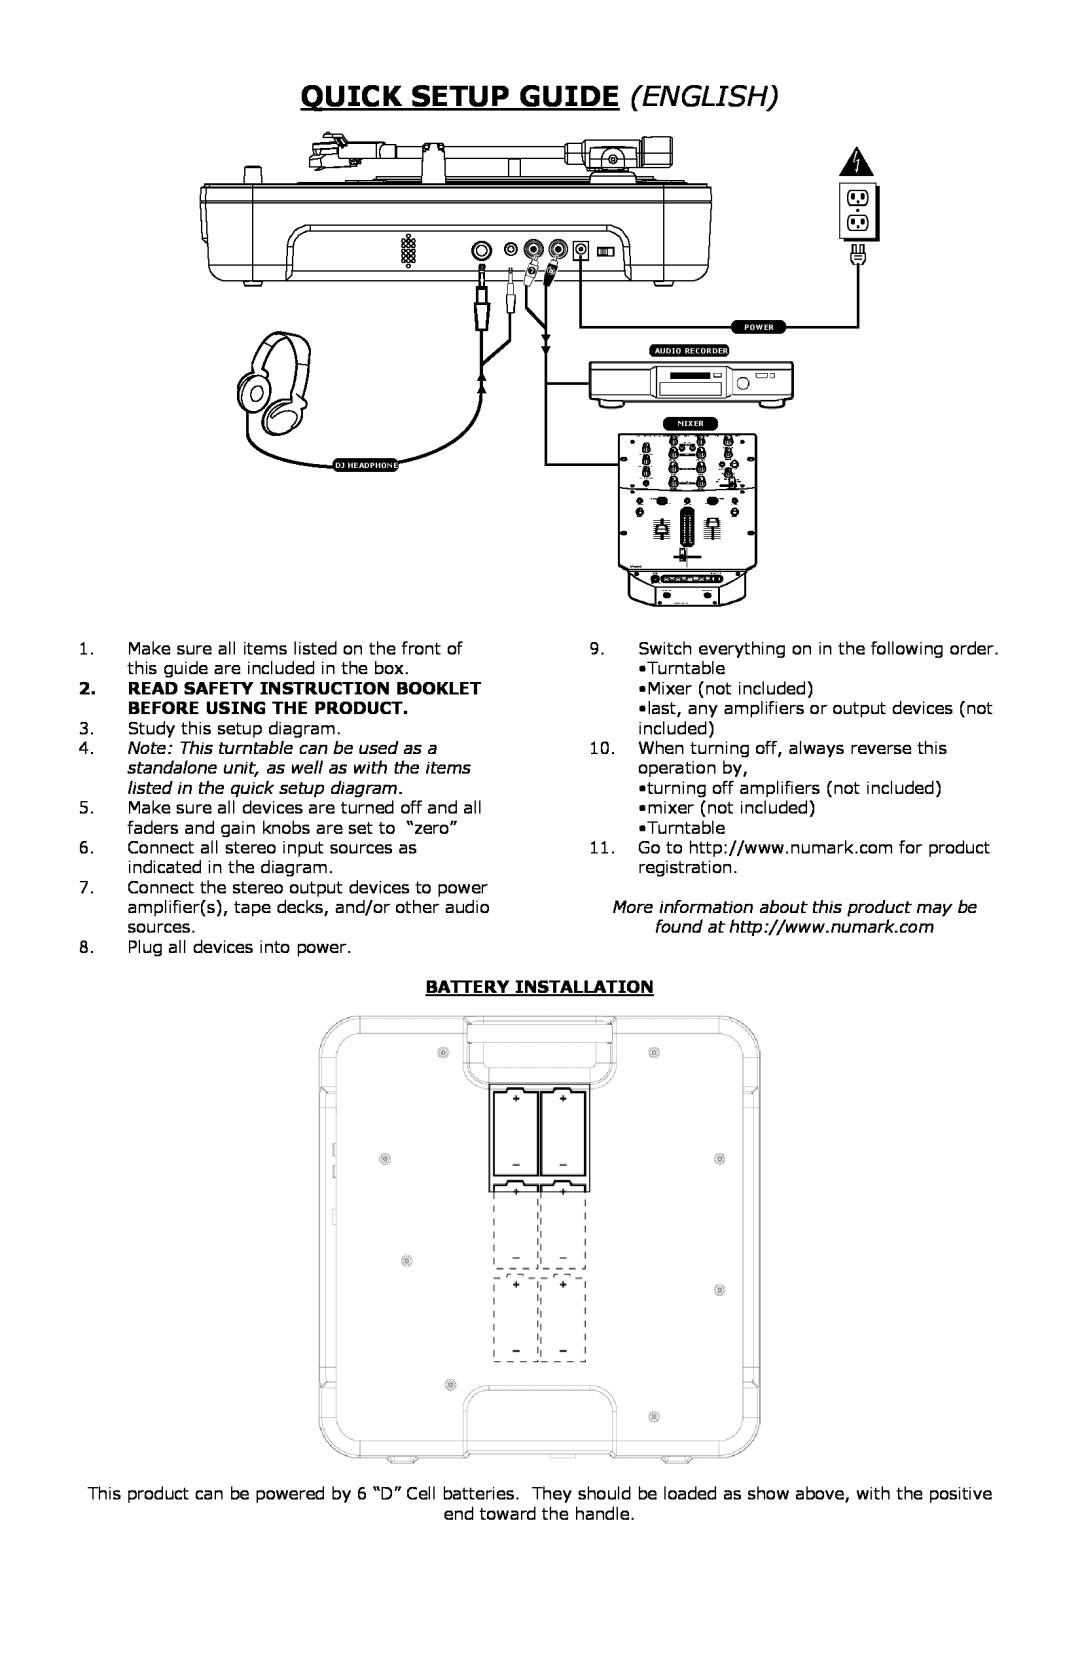 Numark Industries PT-01 Quick Setup Guideenglish, Battery Installation, More information about this product may be 